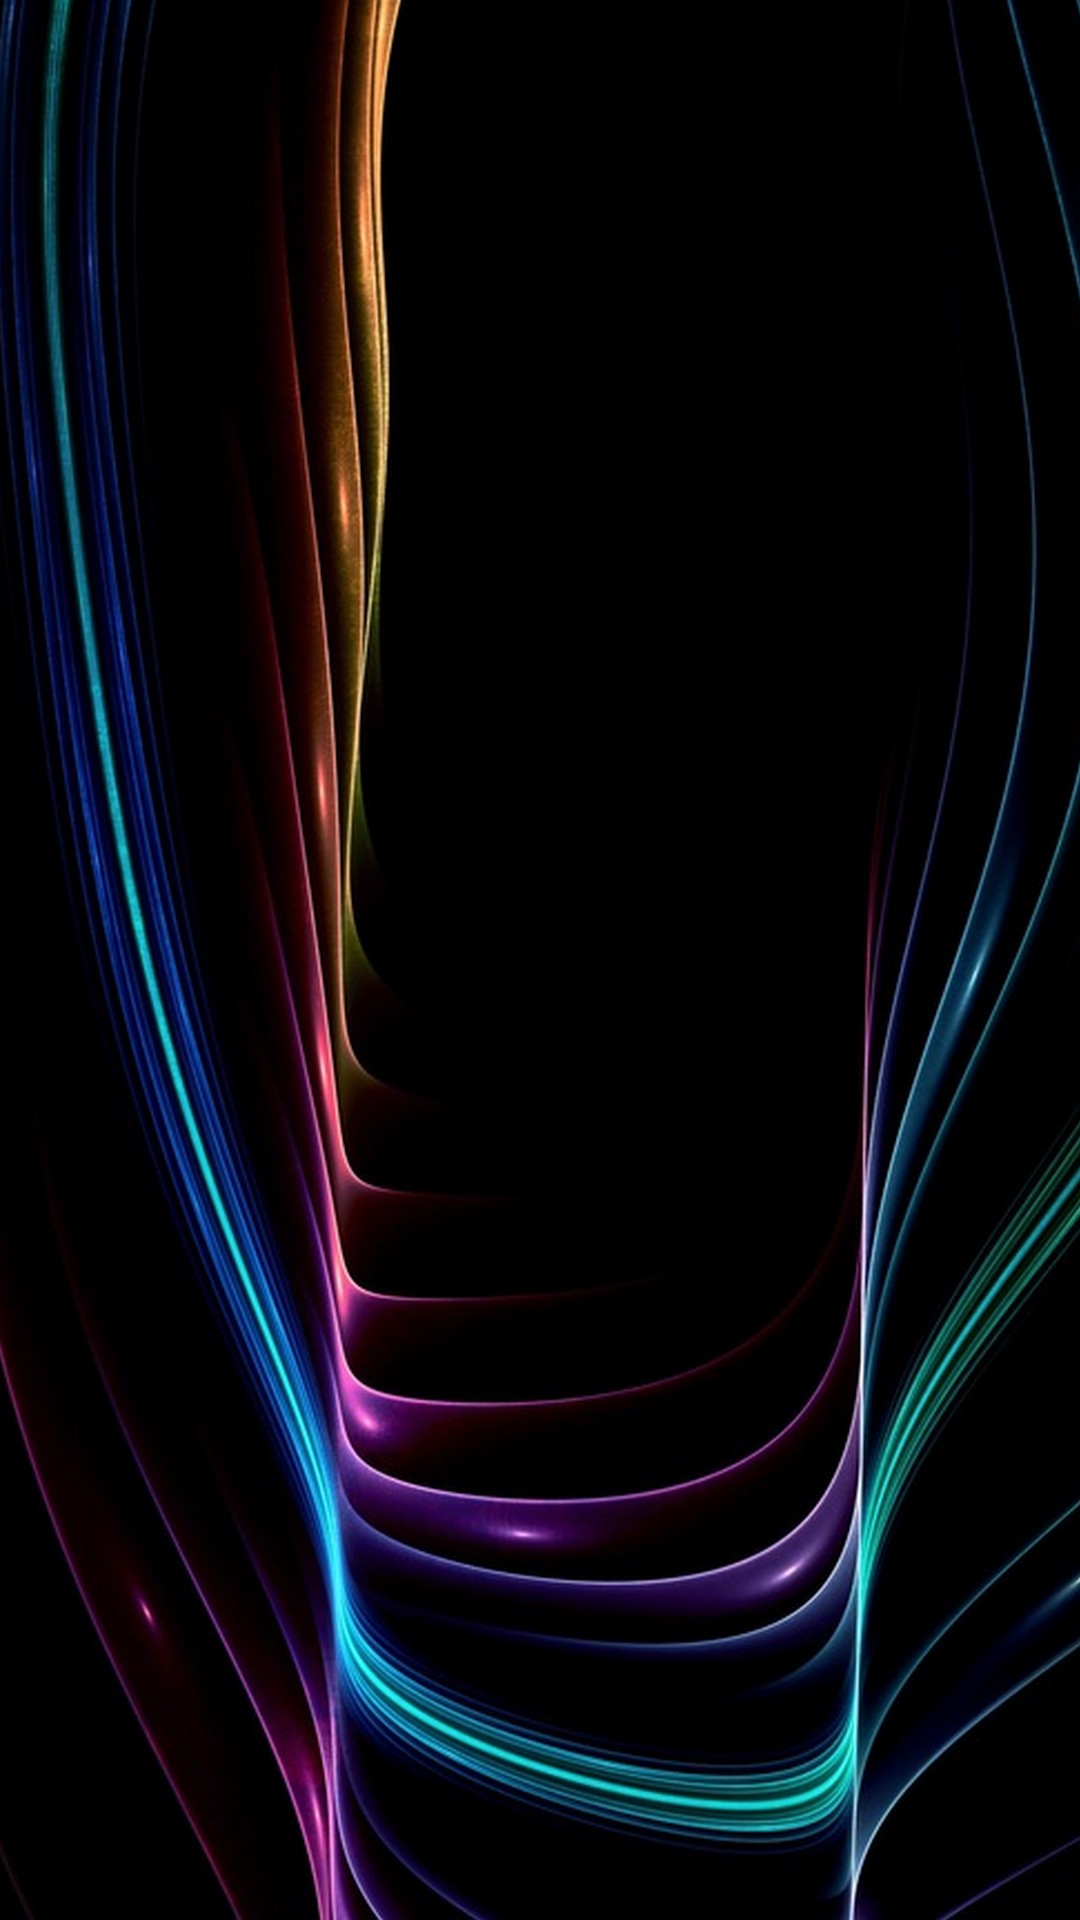 Dark Colorful iPhone X Wallpaper With high-resolution 1080X1920 pixel. You can use this wallpaper for your iPhone 5, 6, 7, 8, X, XS, XR backgrounds, Mobile Screensaver, or iPad Lock Screen